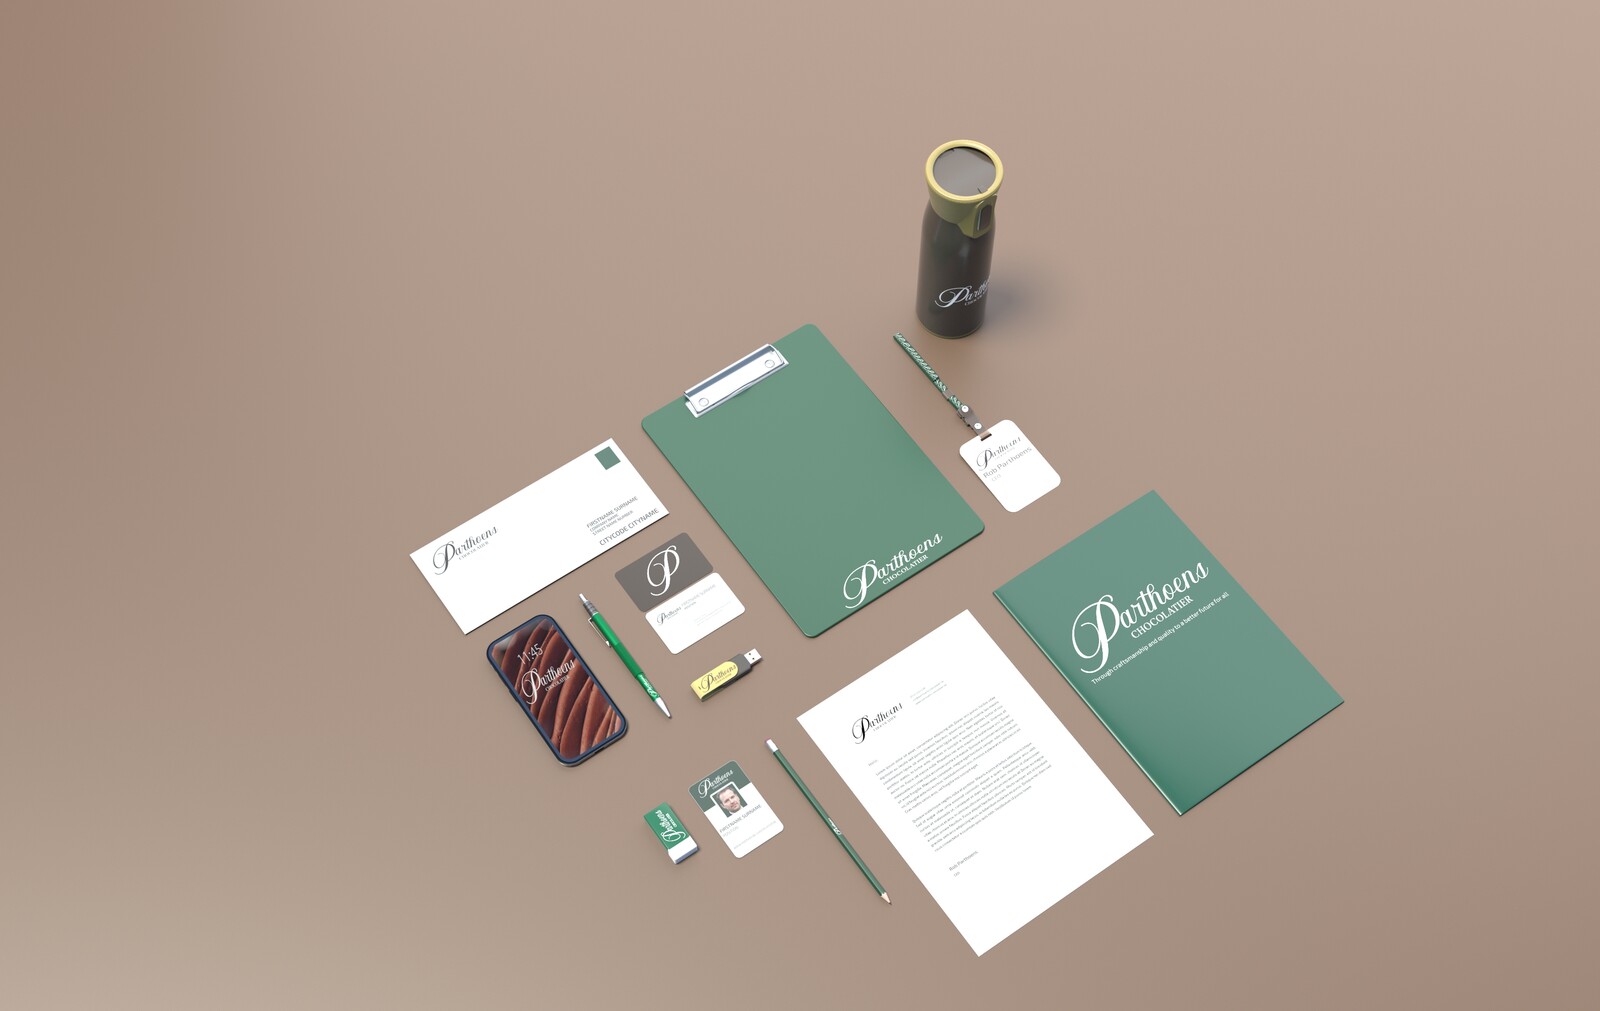 Stationary showing off all the different materials and promotional items. Full 3D.